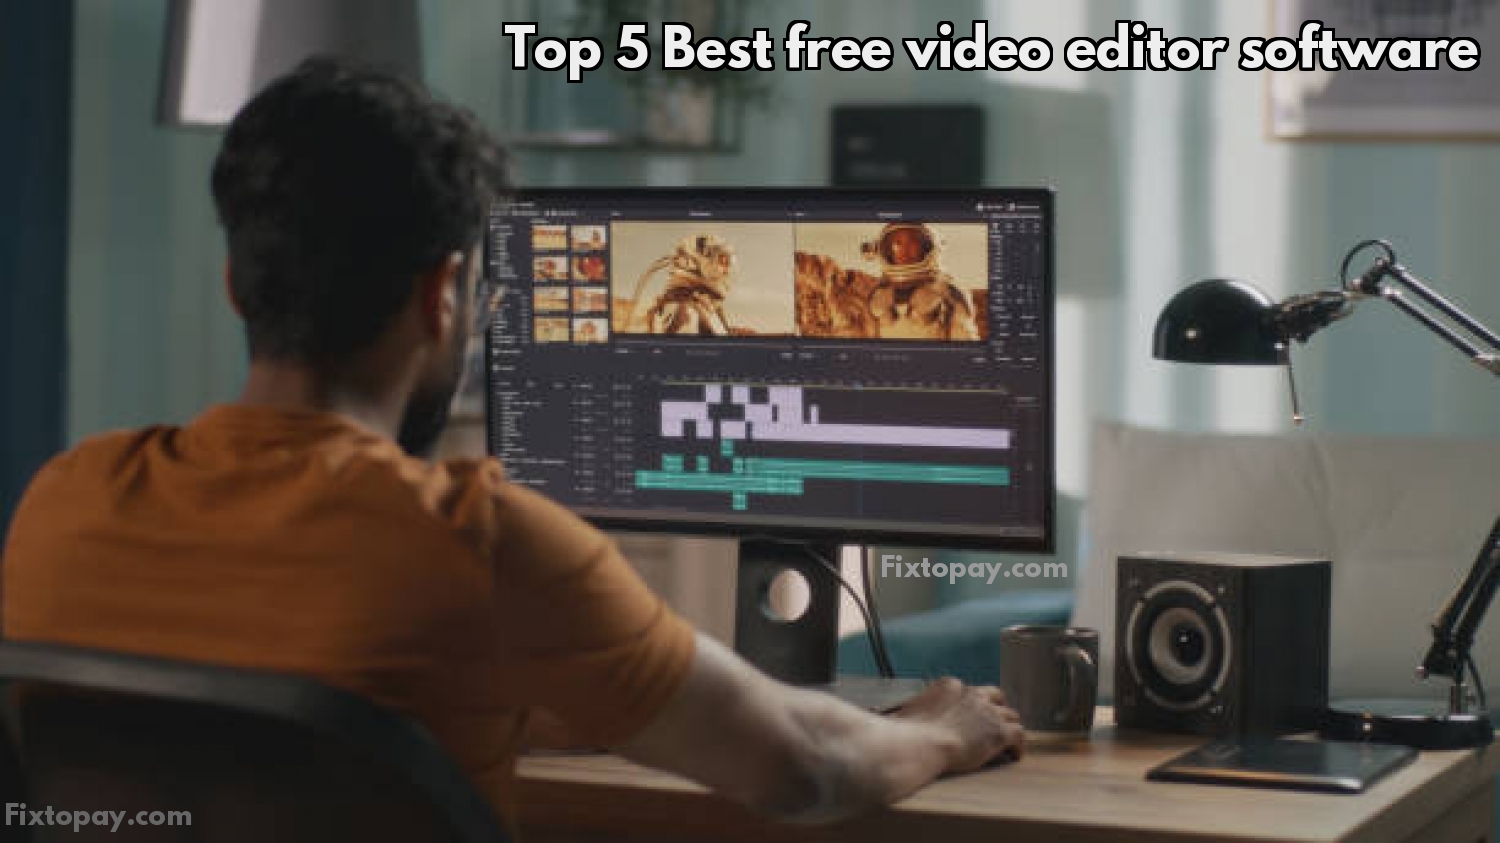 Top 5 Best free video editor software